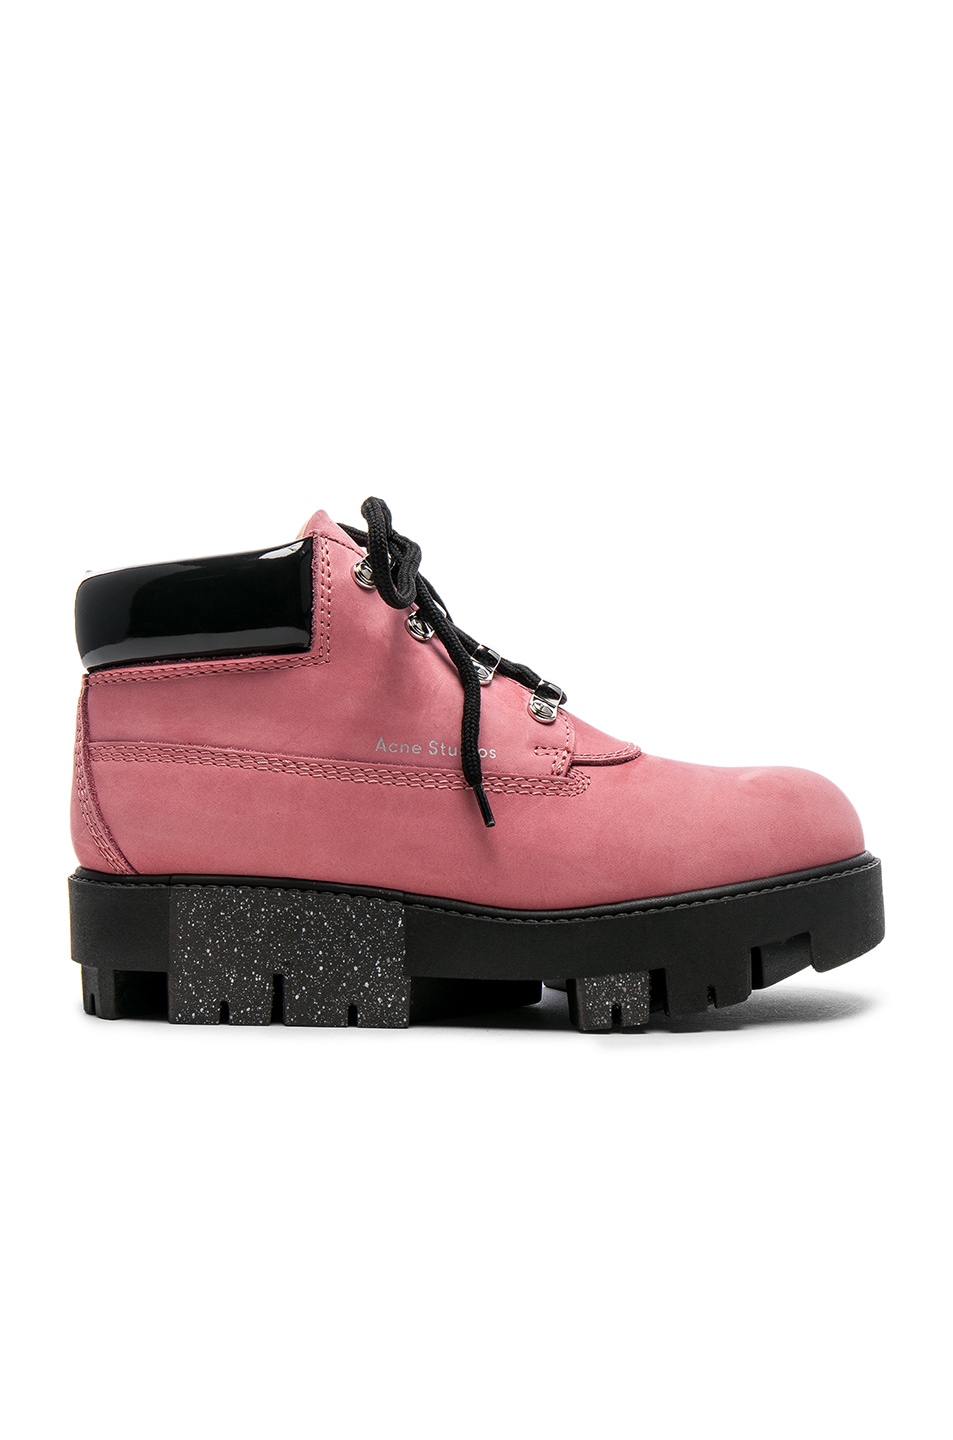 Image 1 of Acne Studios Tinne Leather Boots in Bubble Pink & Black